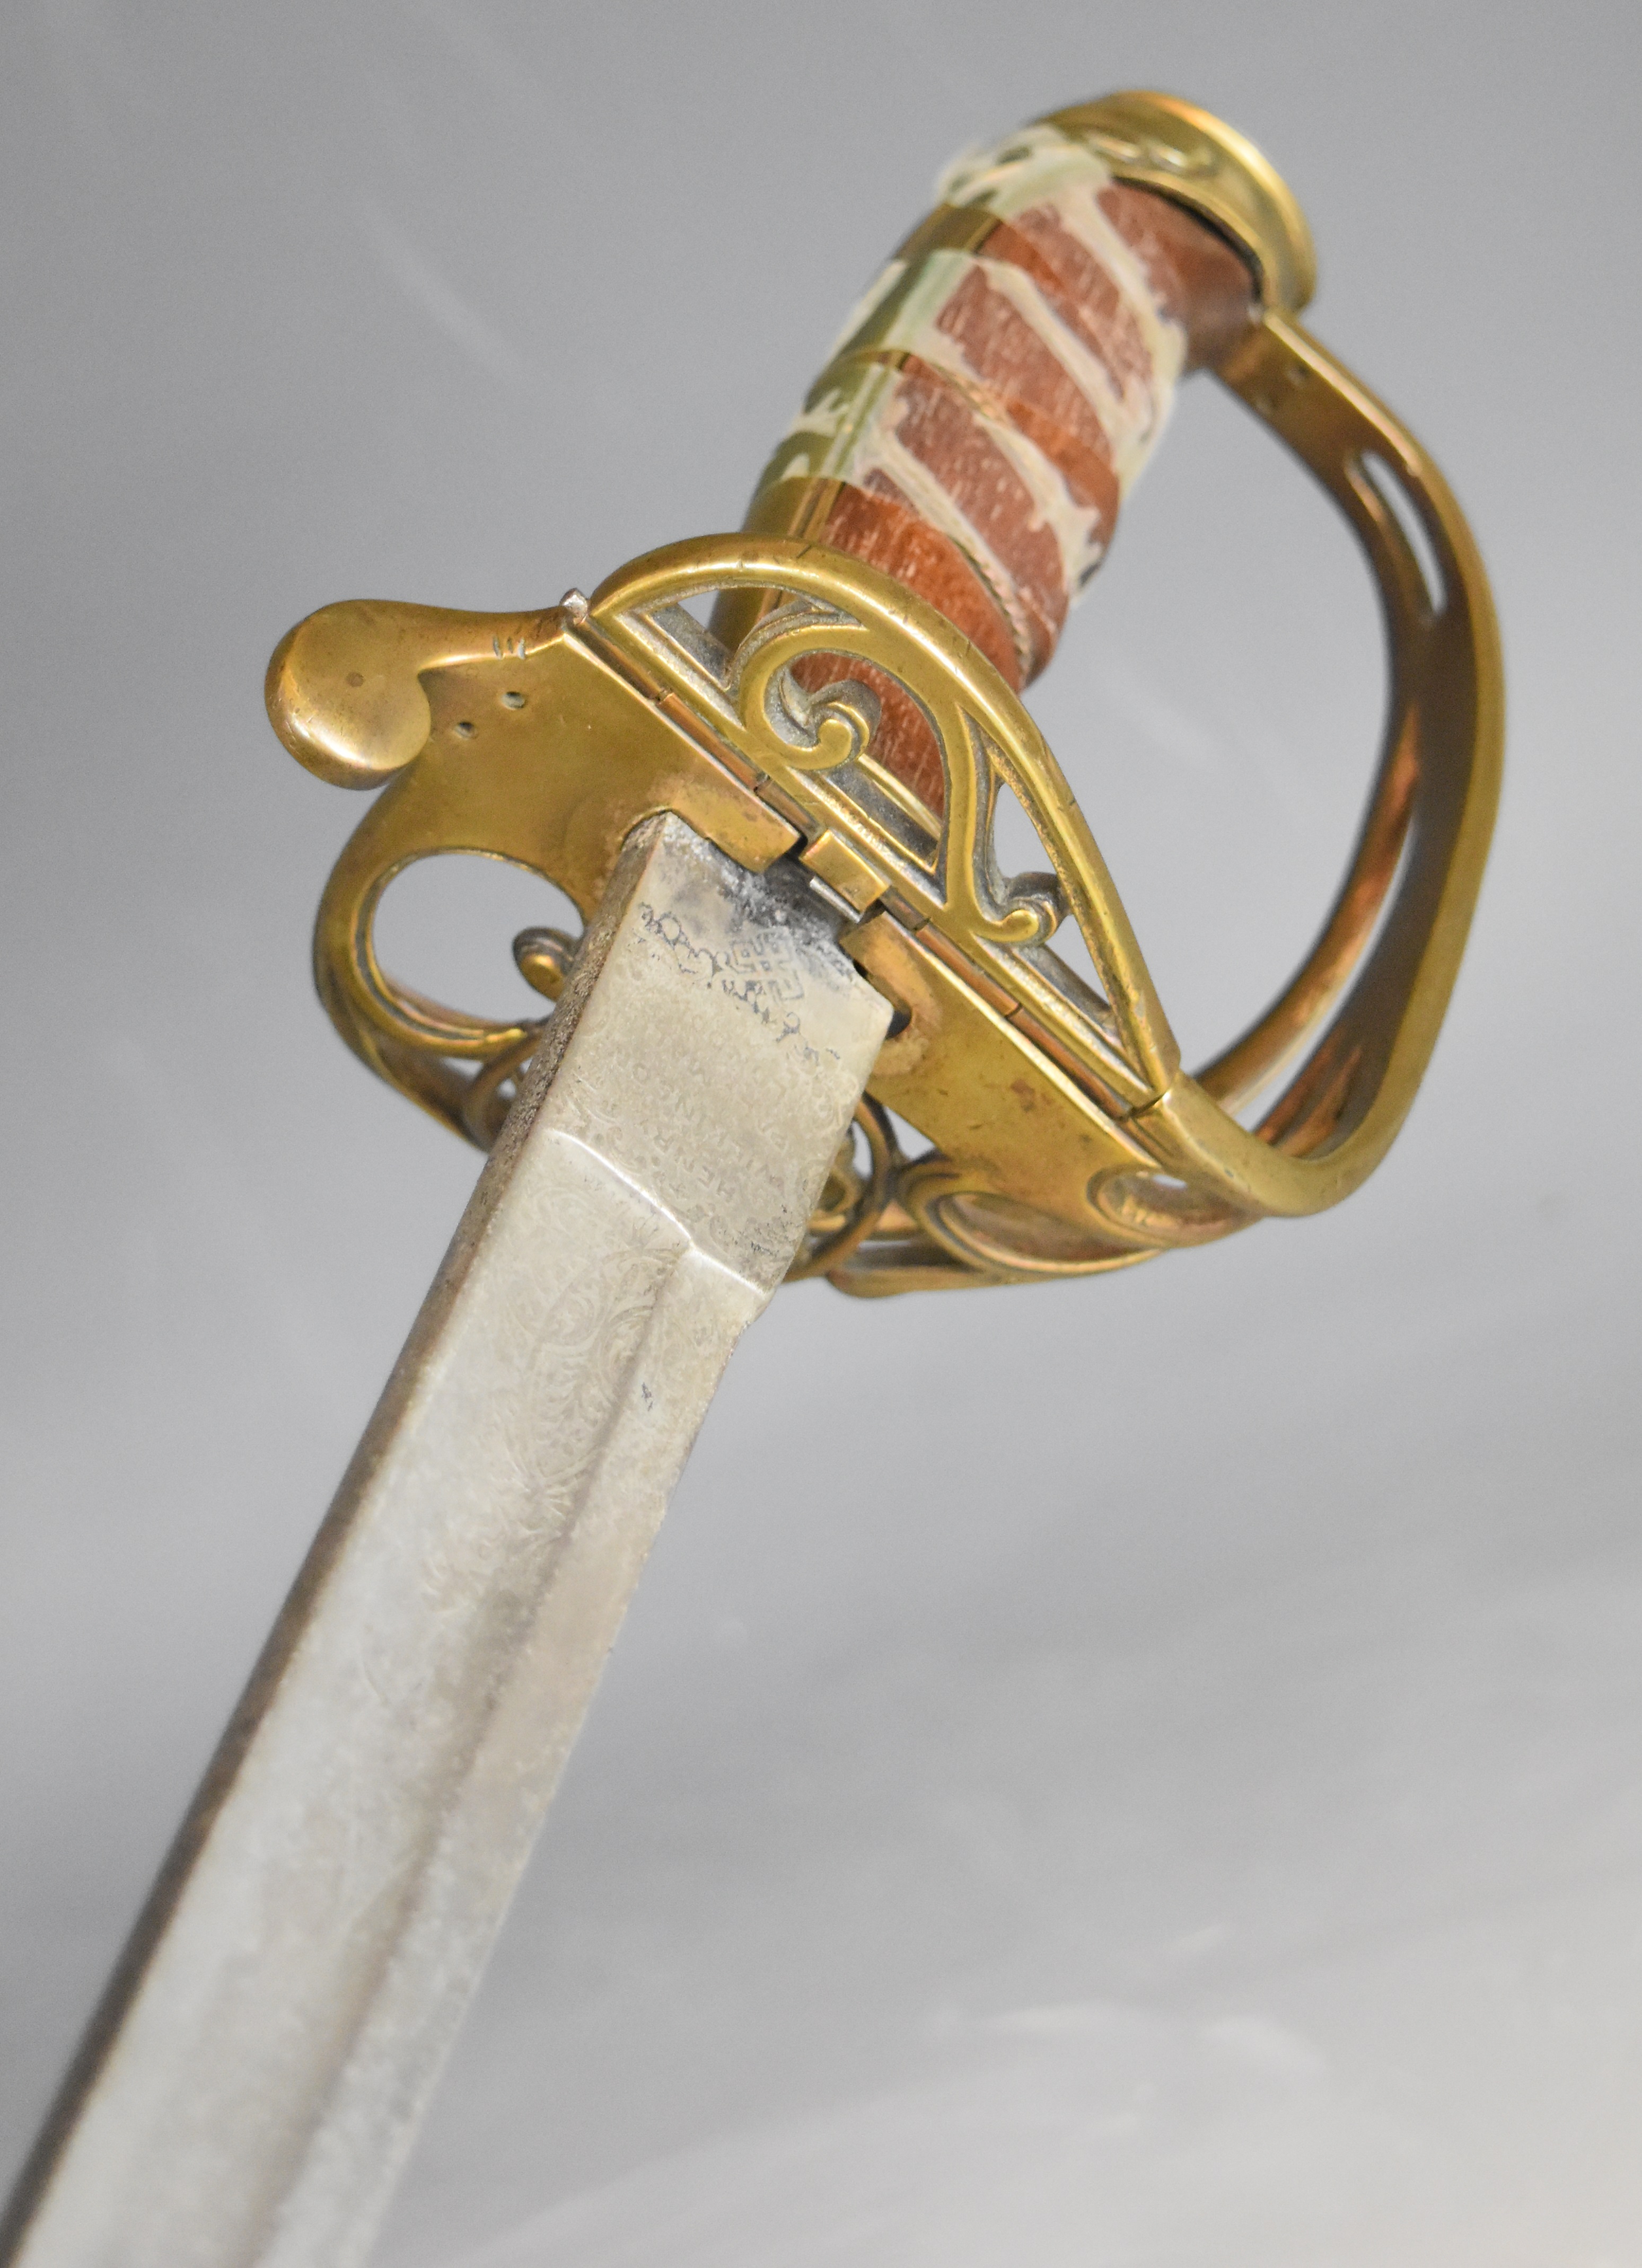 British Army 1822 pattern infantry officer's sword with folding guard, Queen Victoria cypher to - Image 11 of 20